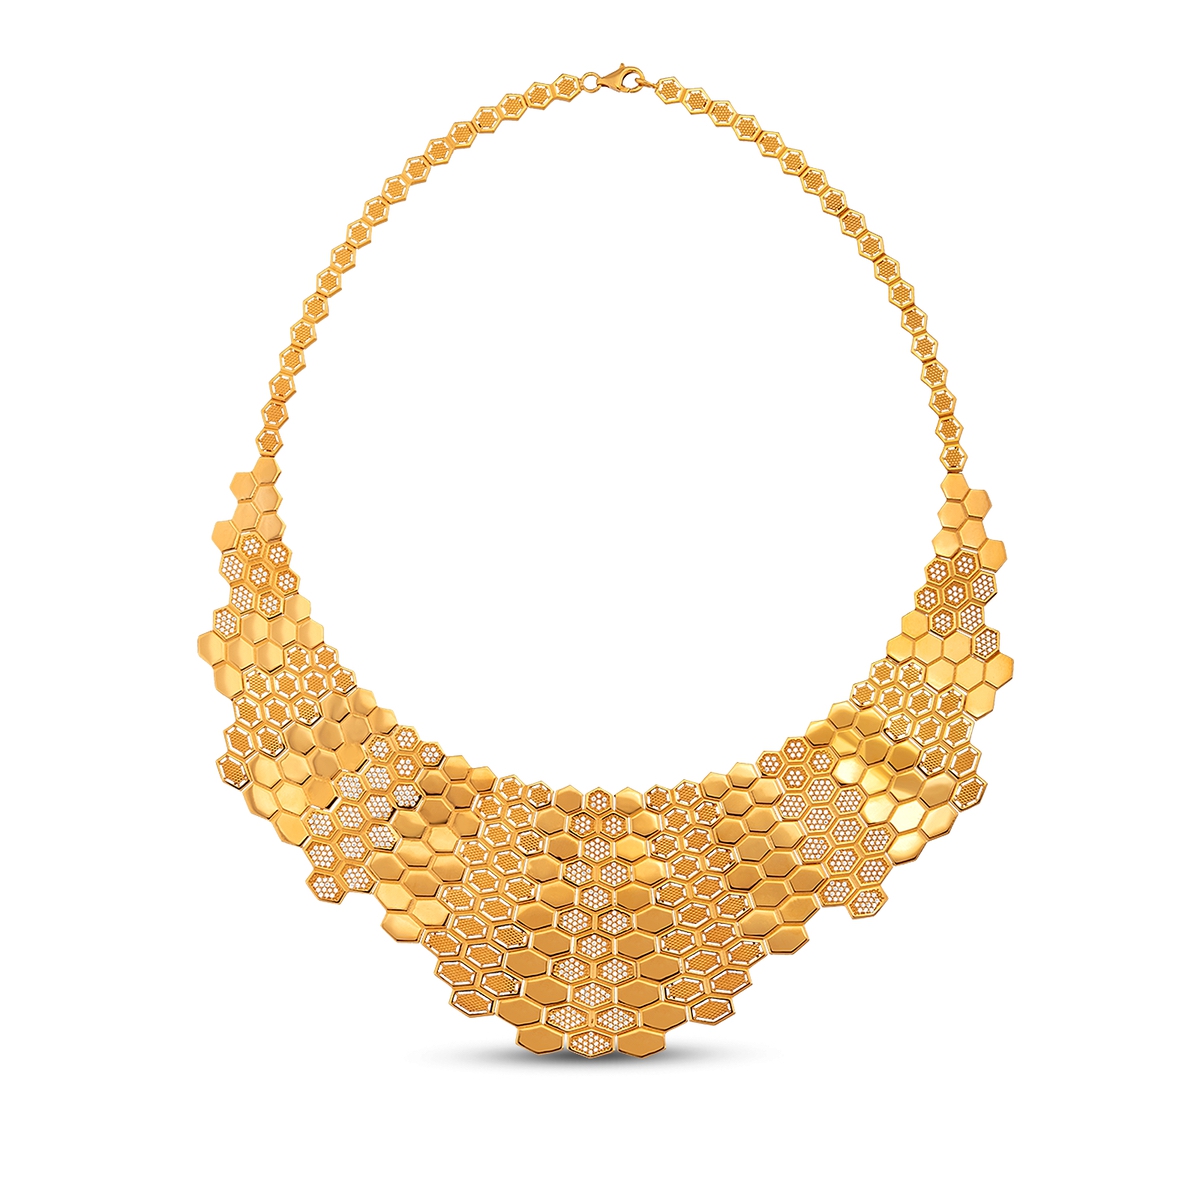 21K 0.410 ct Gold Necklace